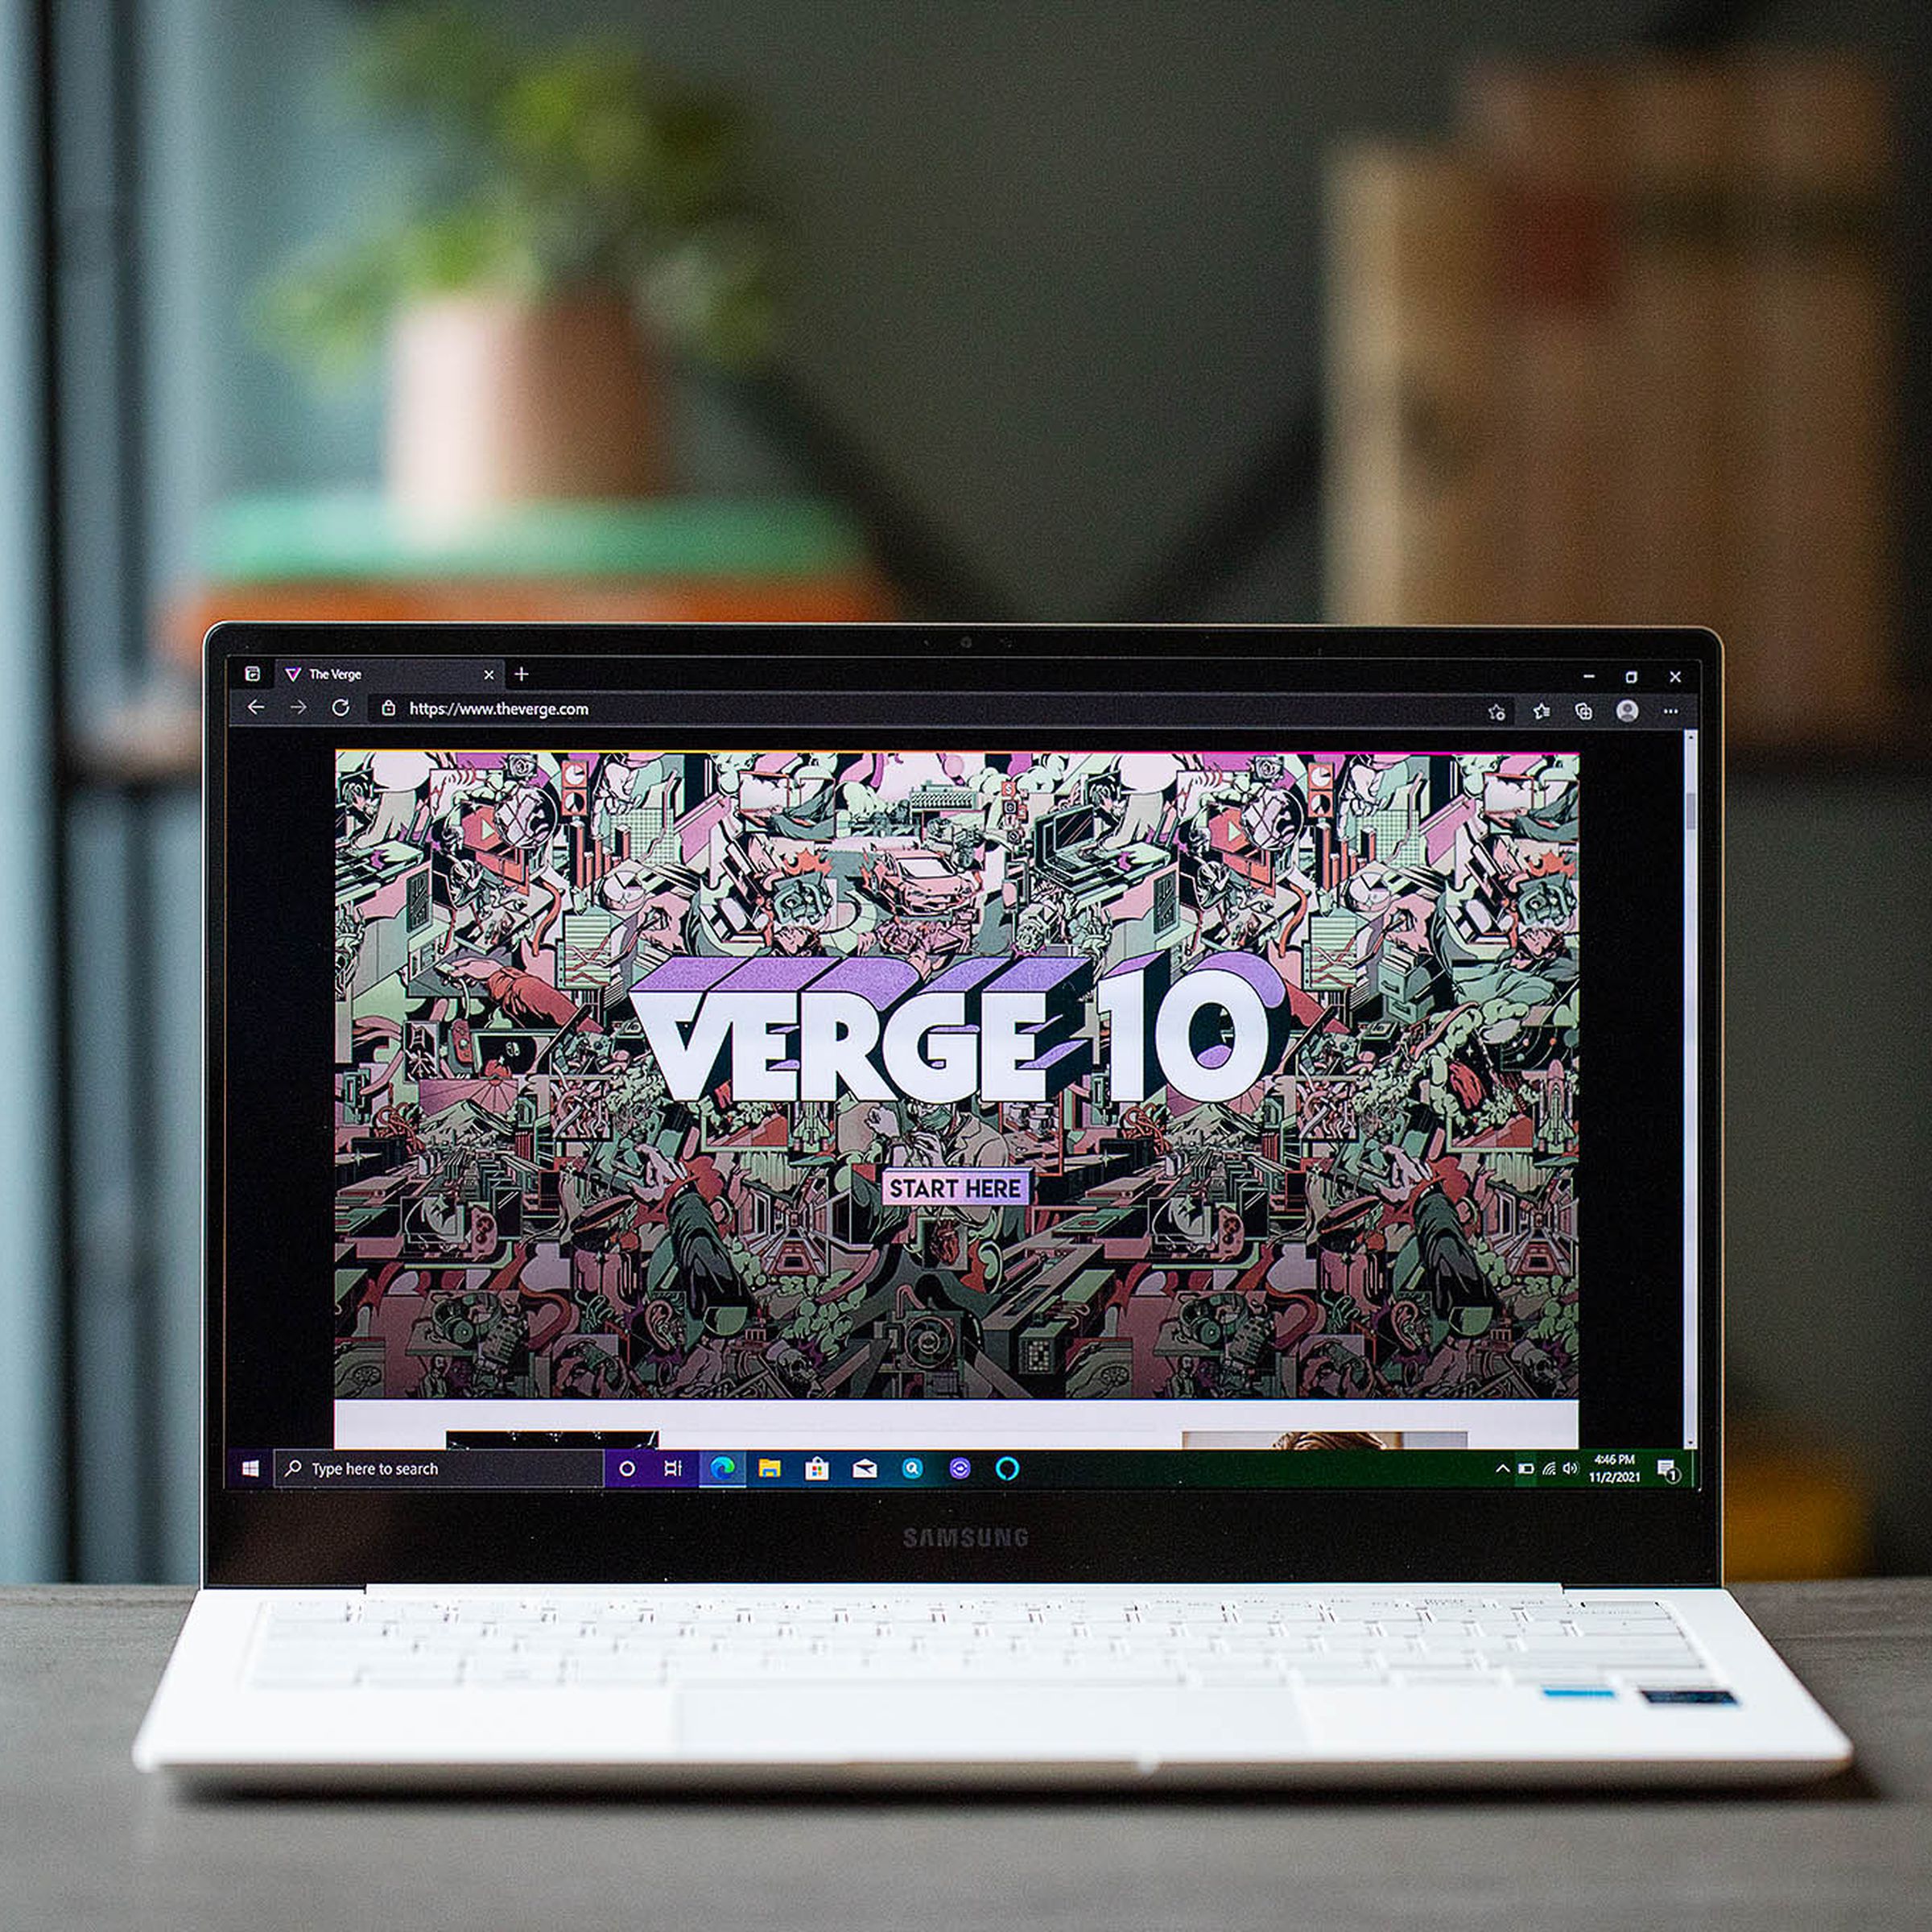 The Samsung Galaxy Book Pro open, displaying the Verge 10 graphic.